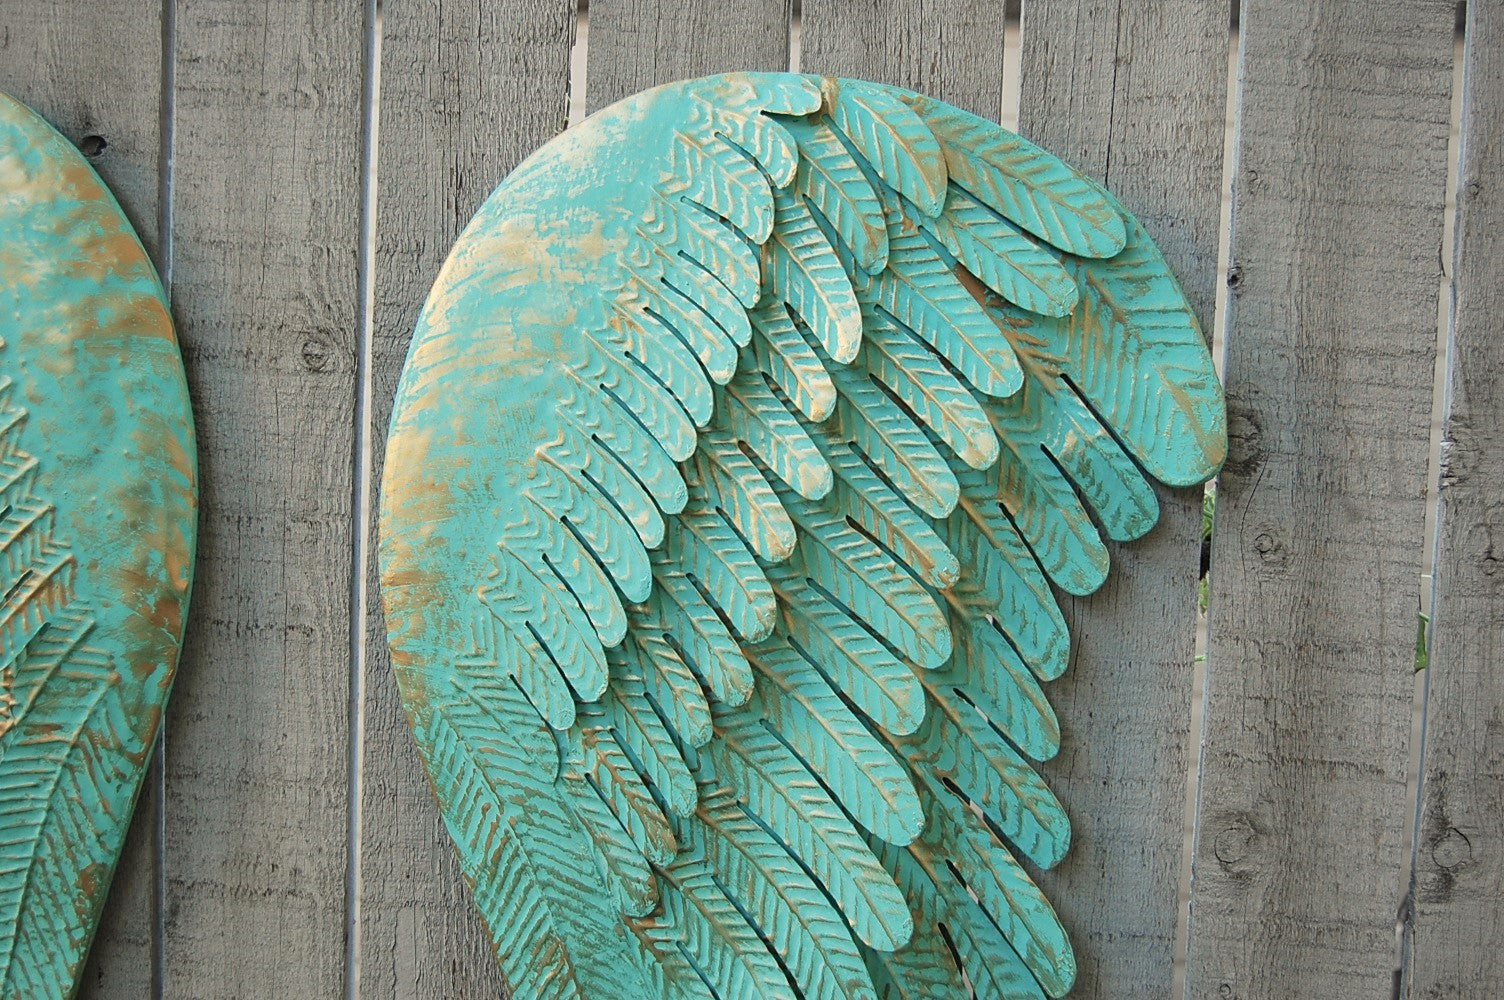 Large angel wings wall decor - The Vintage Artistry